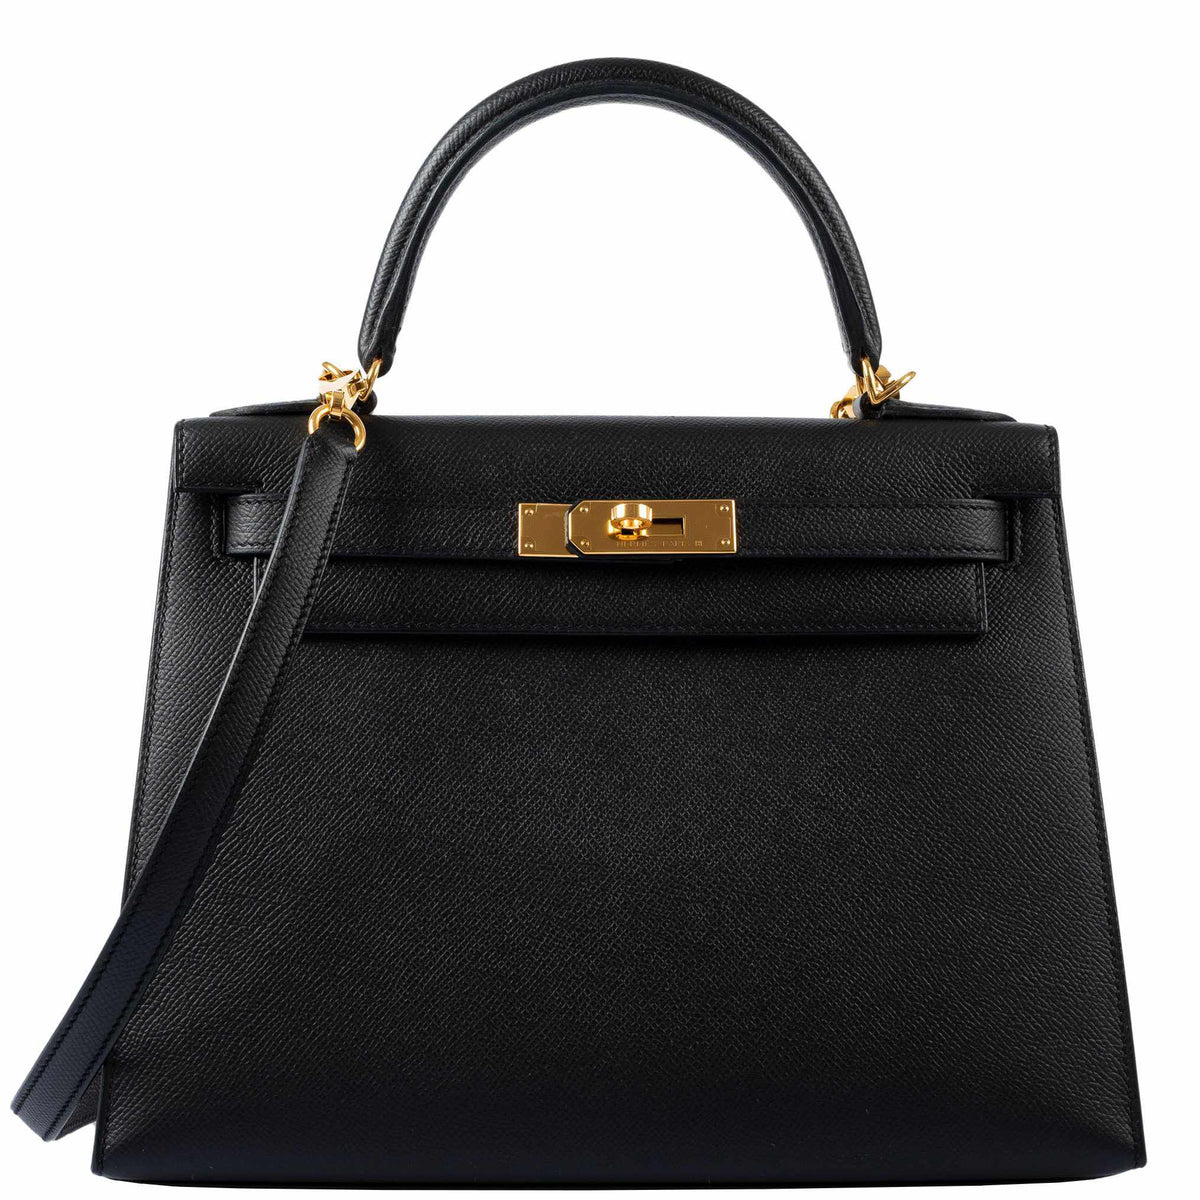 All About Hermès In & Out Kelly  2021's Limited Edition Kelly & Birkin 